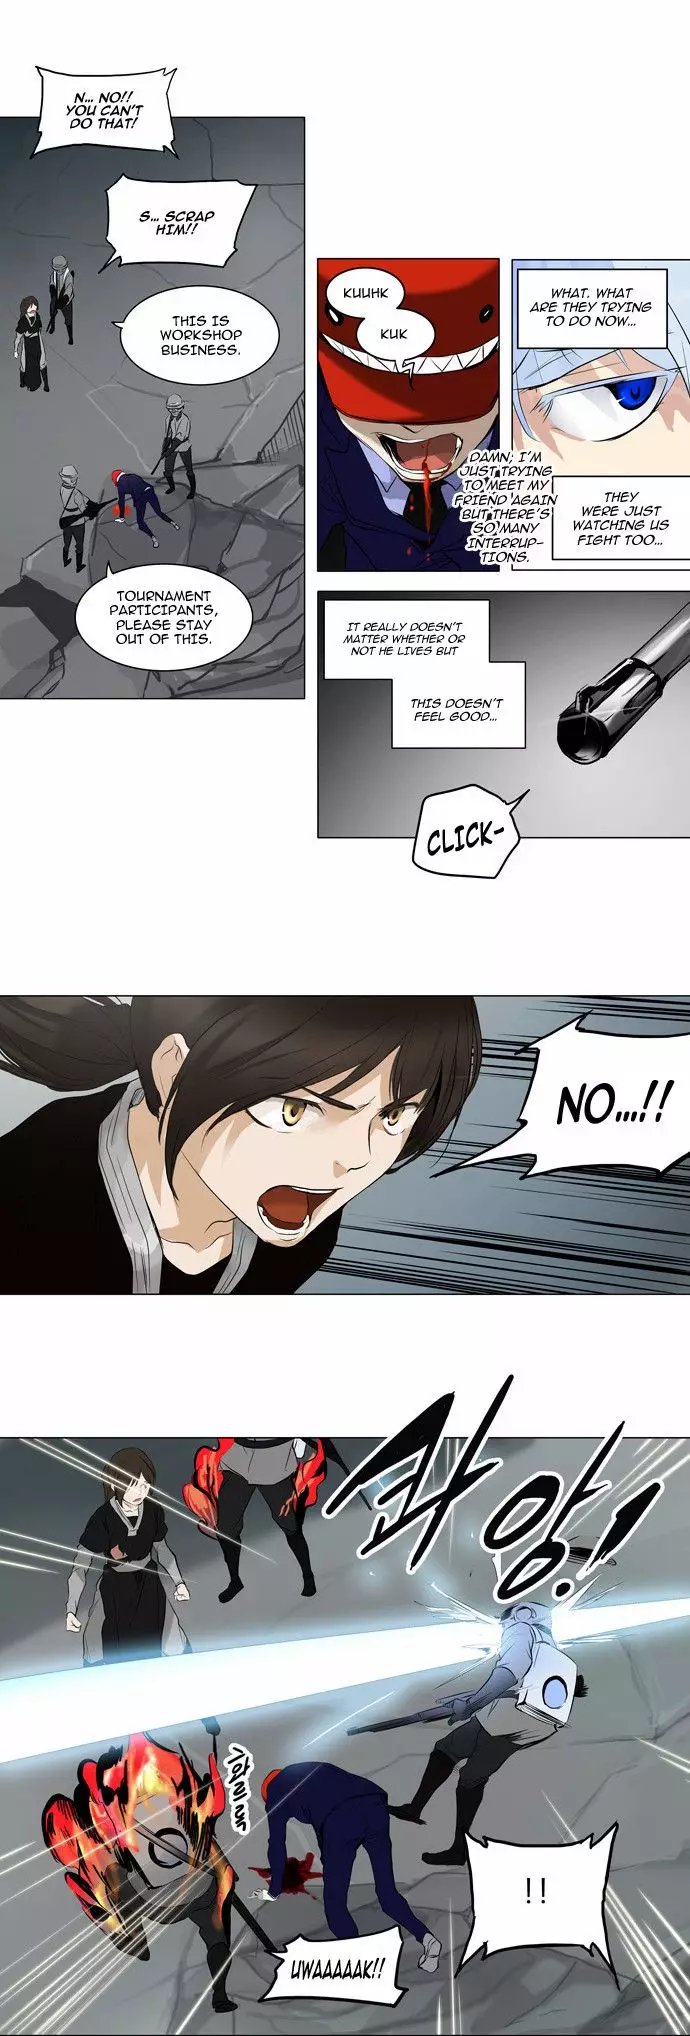 Tower of God - 176 page p_00015